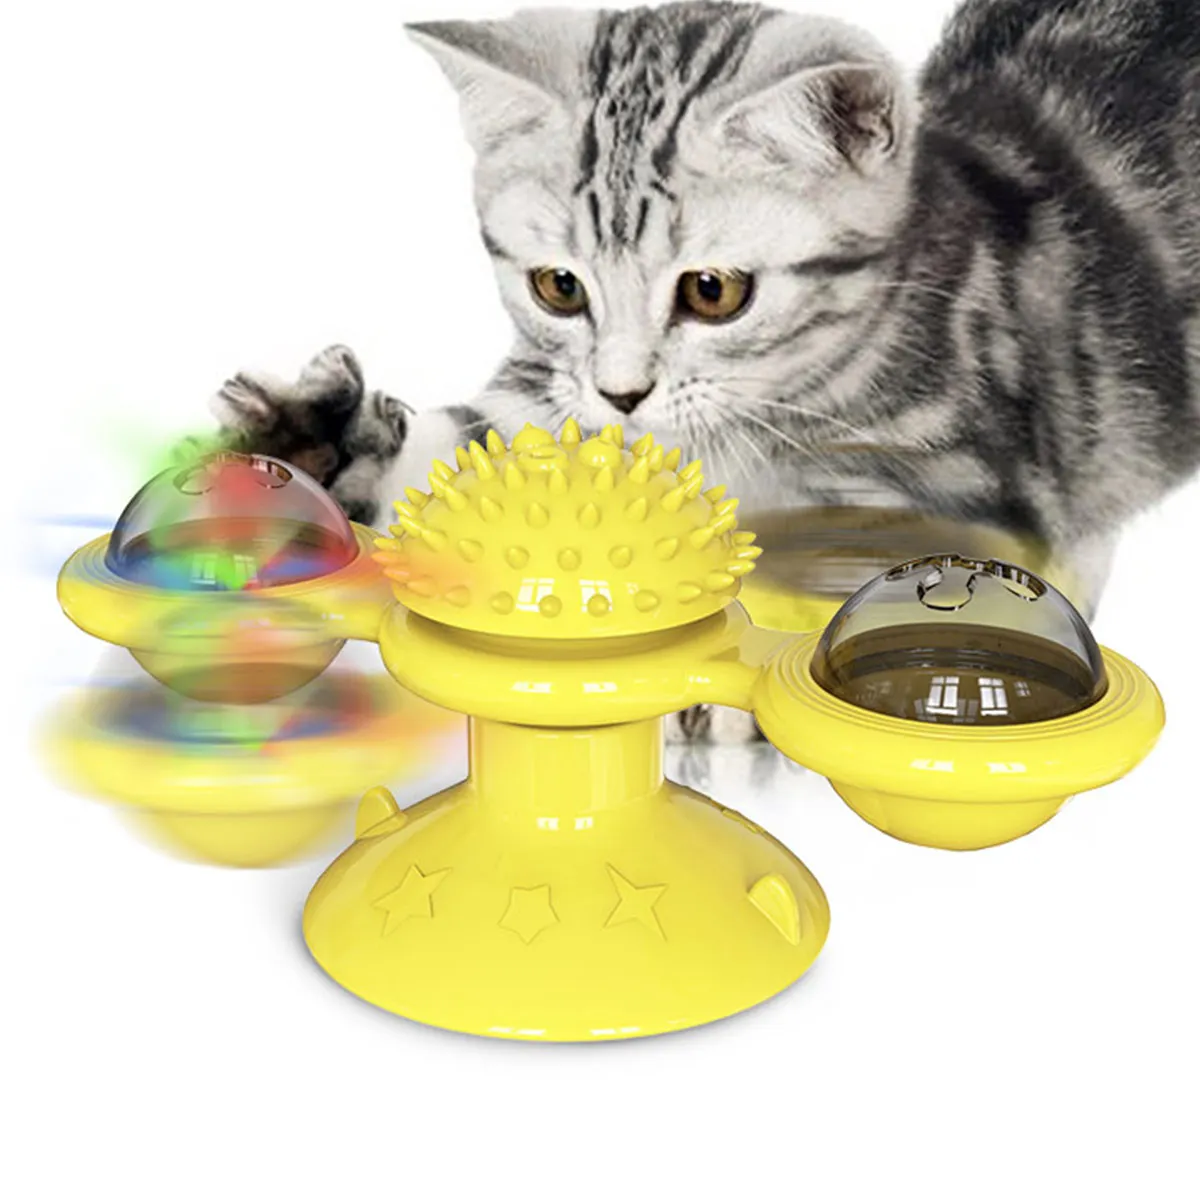 

Windmill turntable with suction cup cat toy creative funny cat artifact Mint molar stick to clean teeth, Mix color